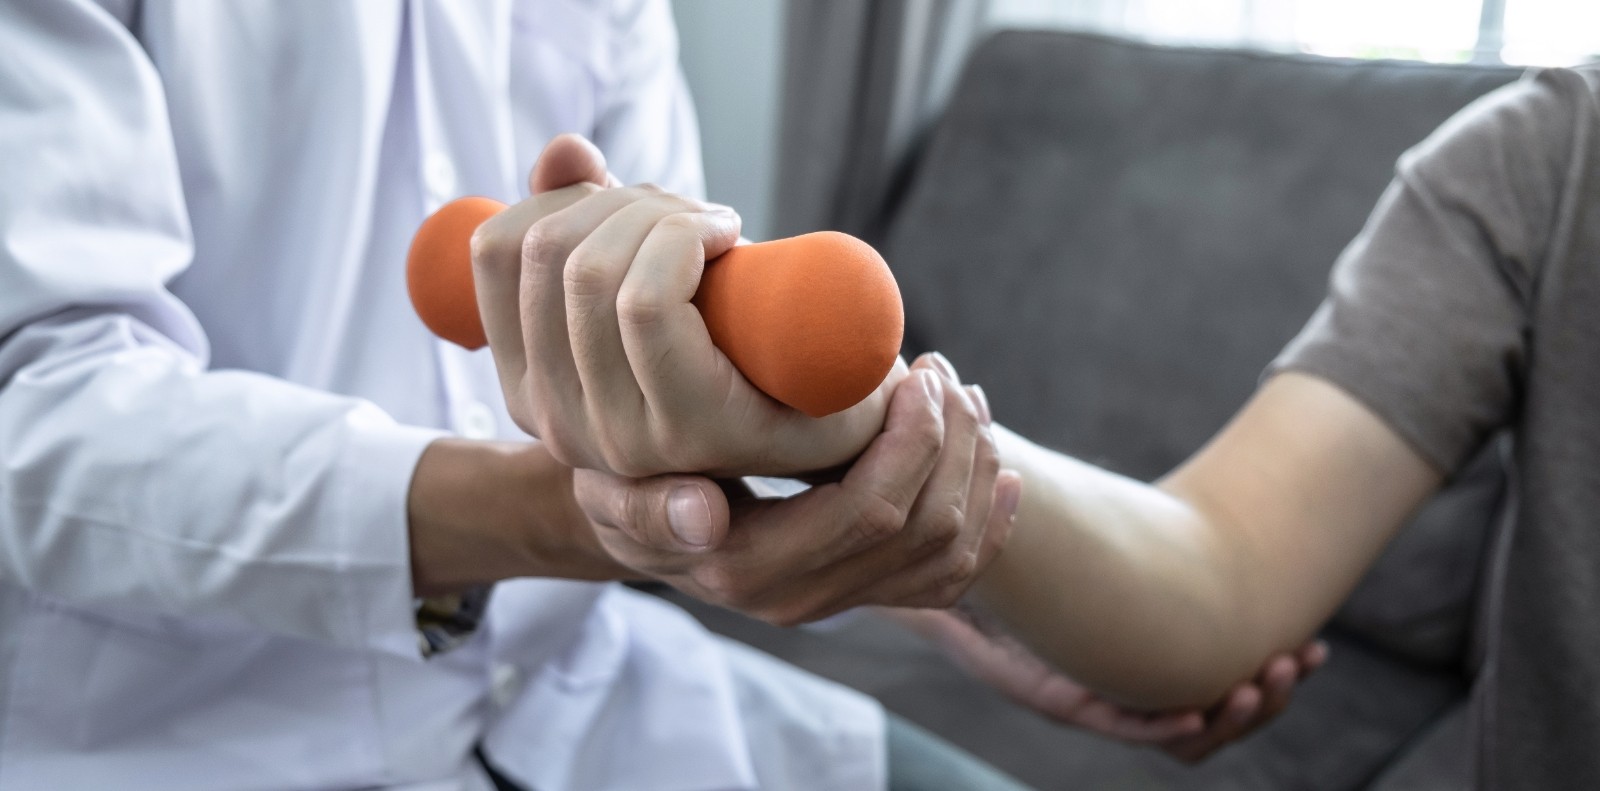 a medial professional assists a patient in curling a dumbbell with their hand